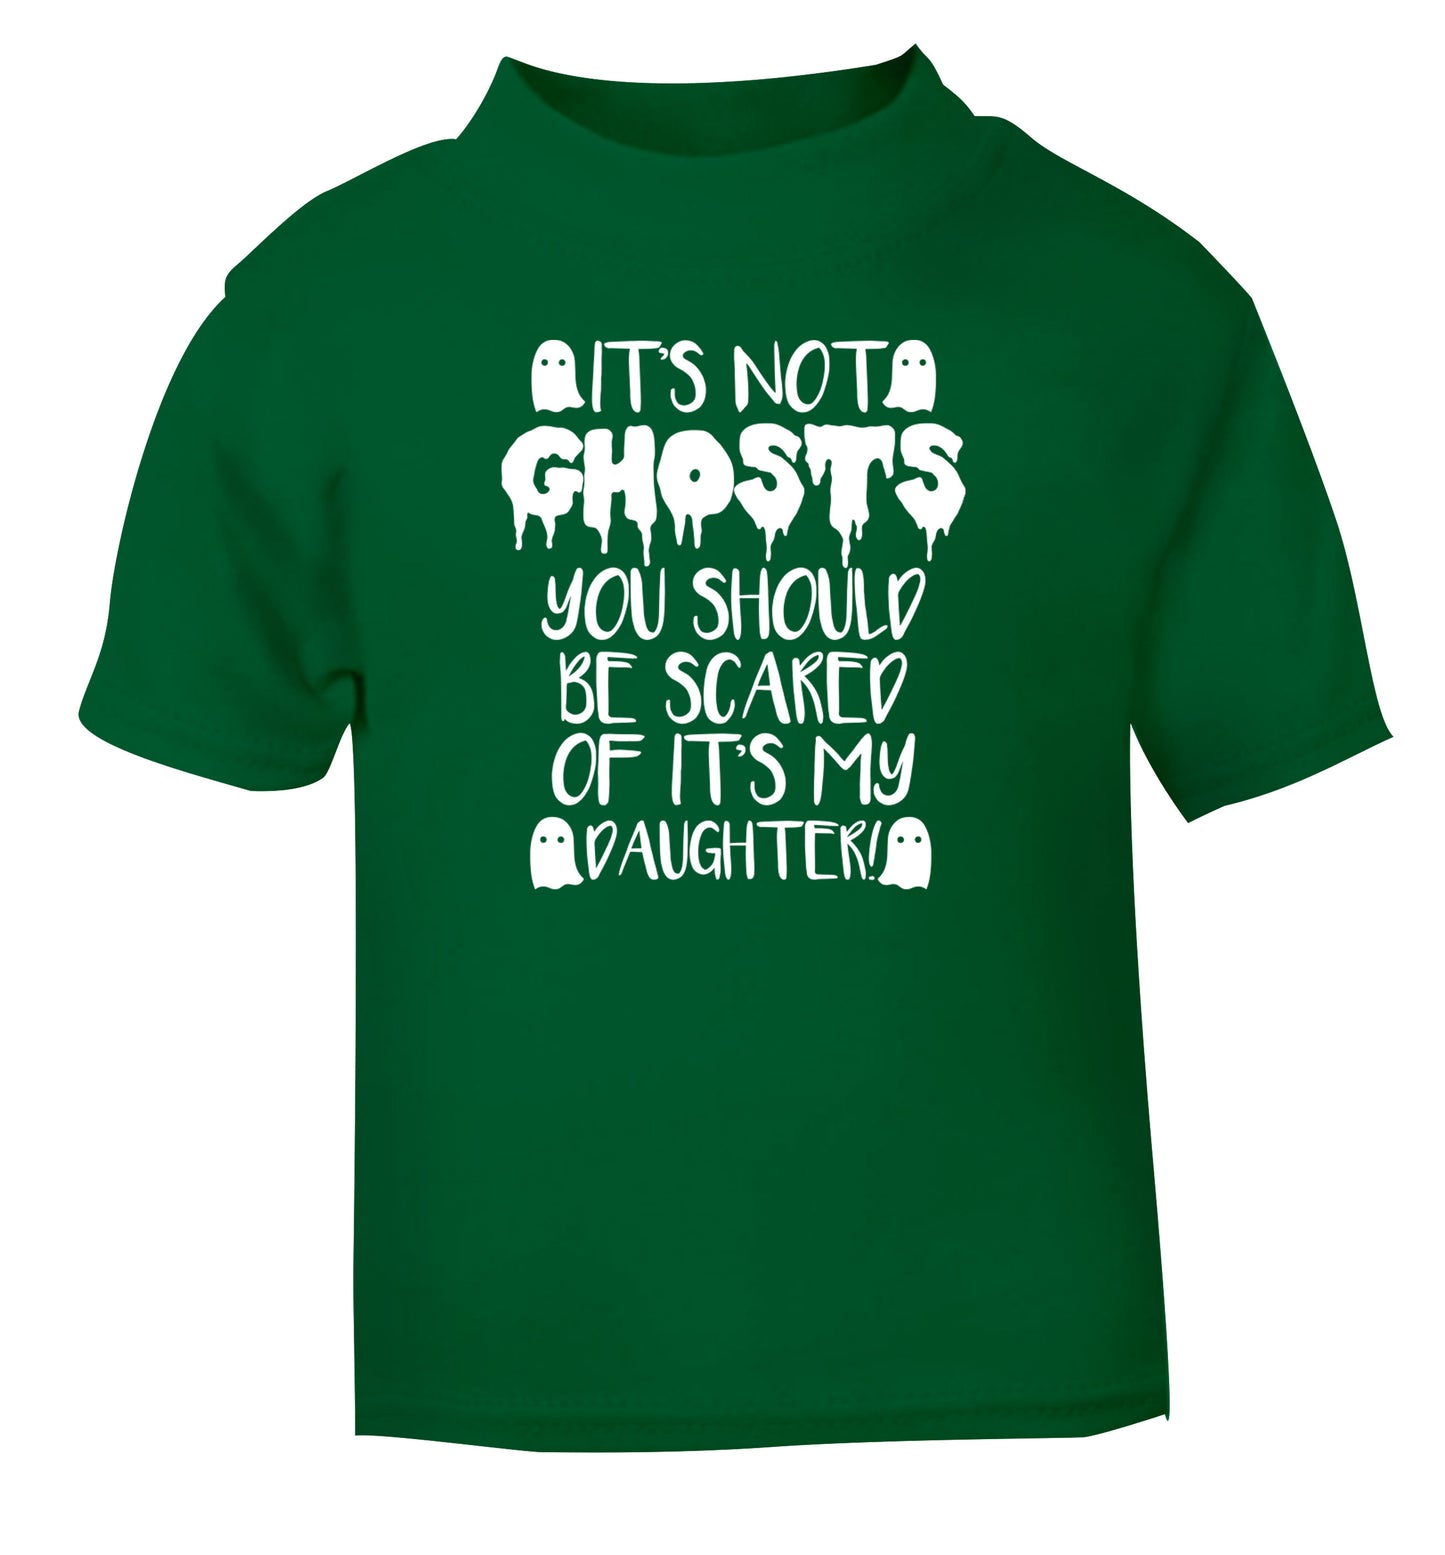 It's not ghosts you should be scared of it's my daughter! green Baby Toddler Tshirt 2 Years